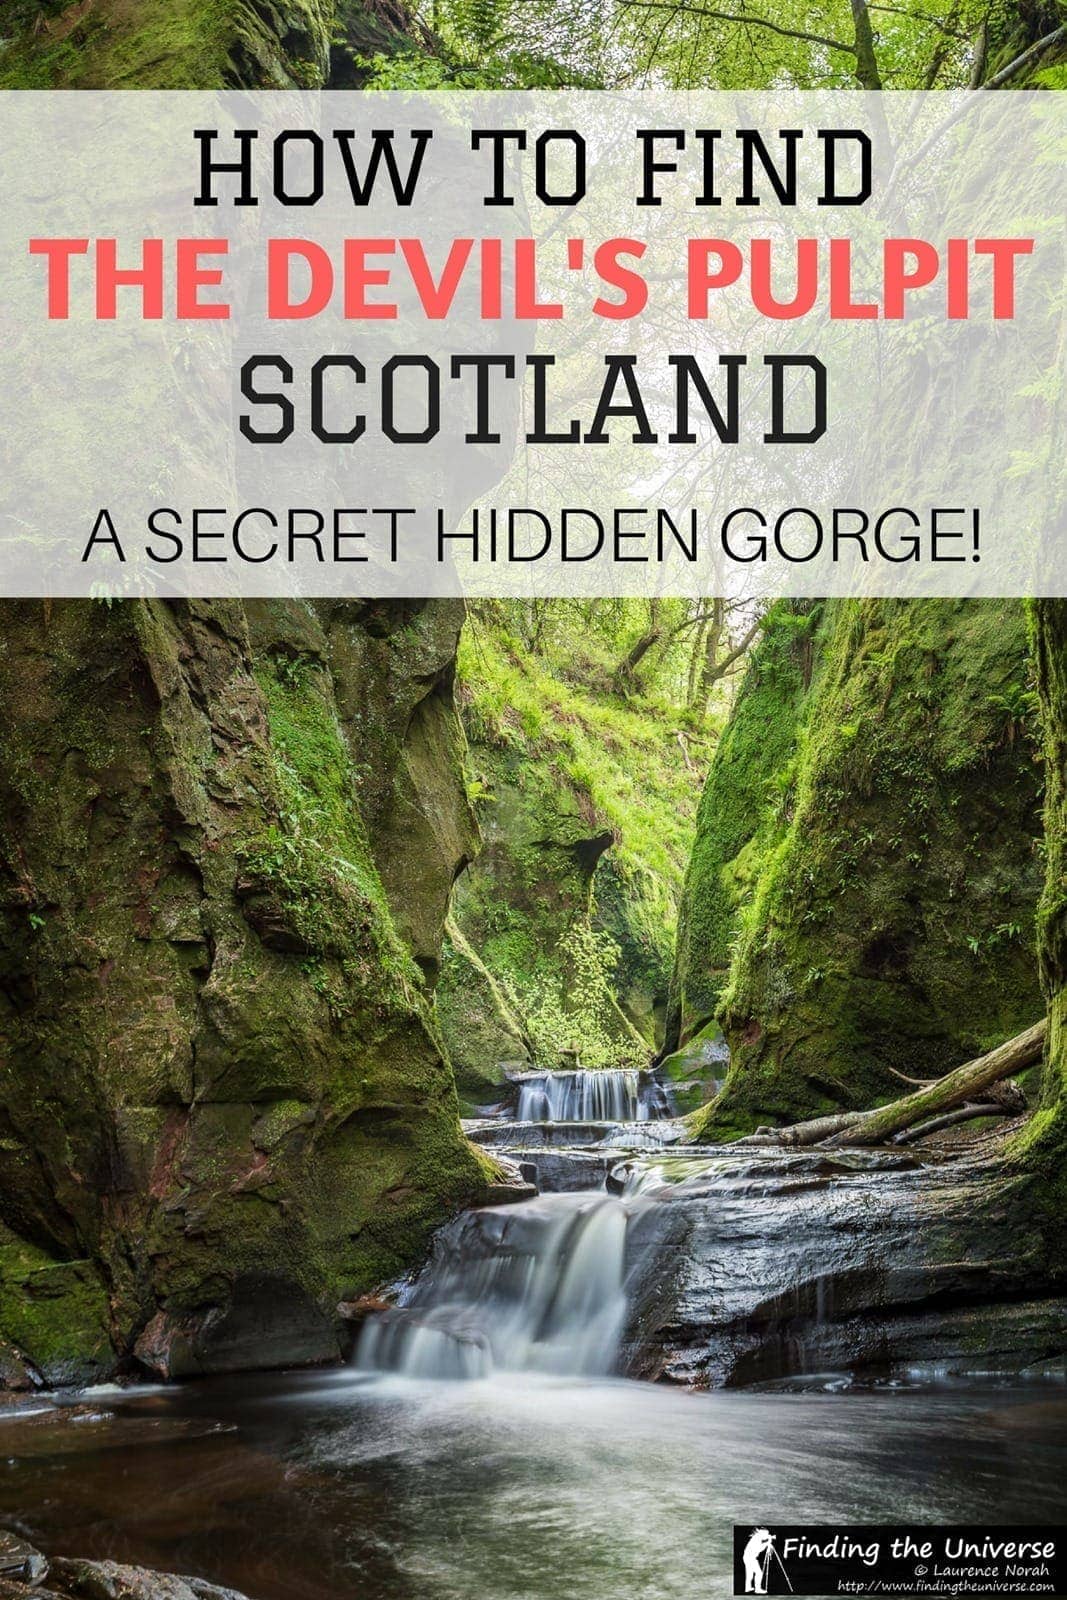 Guide to finding the Devils Pulpit, Finnich Glen, in Scotland, including where to park, how to get down to the gorge, why it's called the Devil's Pulpit, and photography tips for getting great photos of the Devils Pulpit Gorge